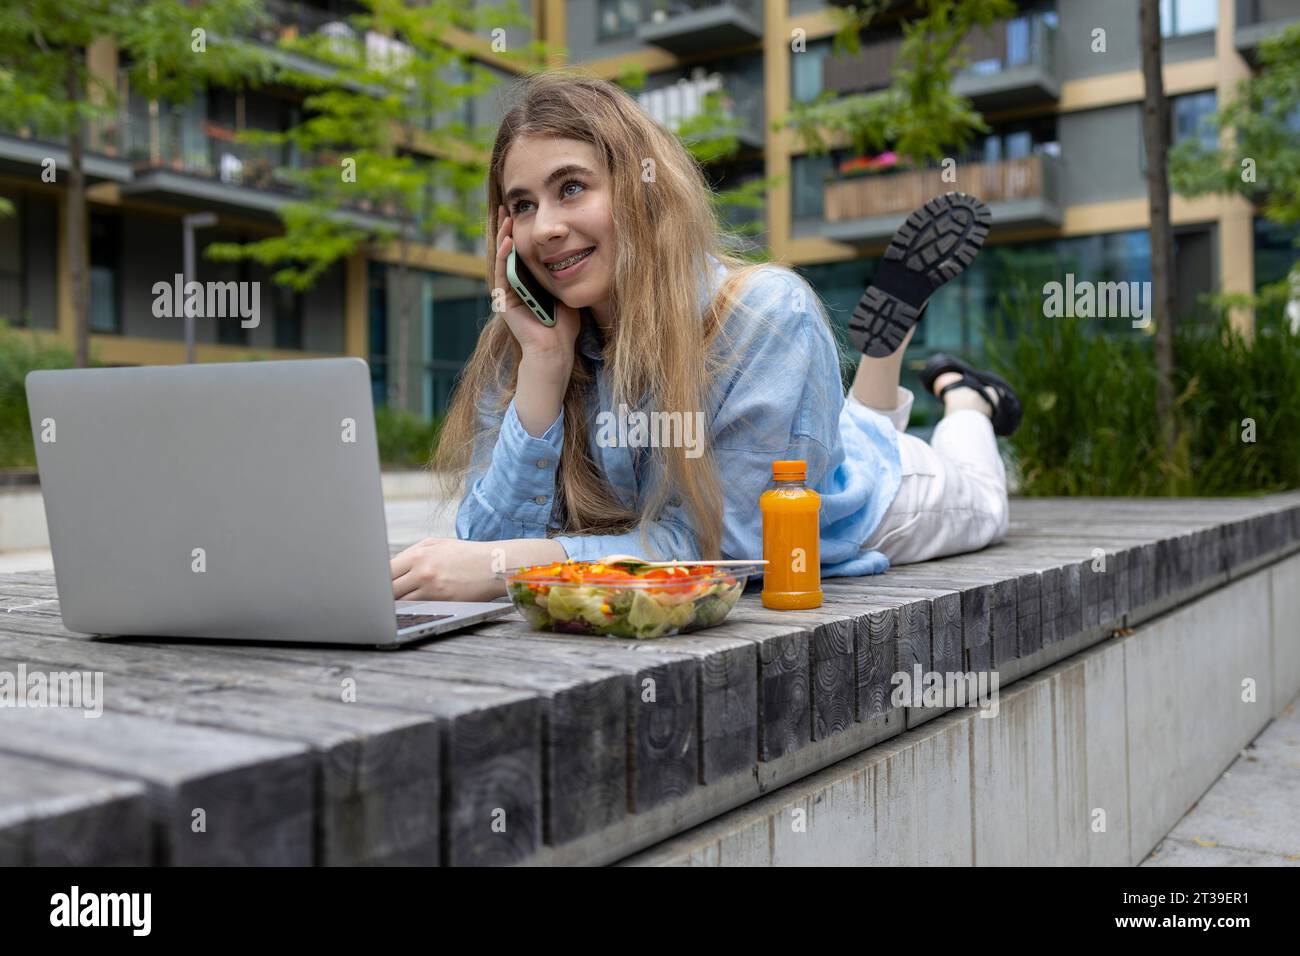 Happy blond haired student woman with braces lying in wooden bench and talking with her smartphone in lunchtime in urban place. Stock Photo